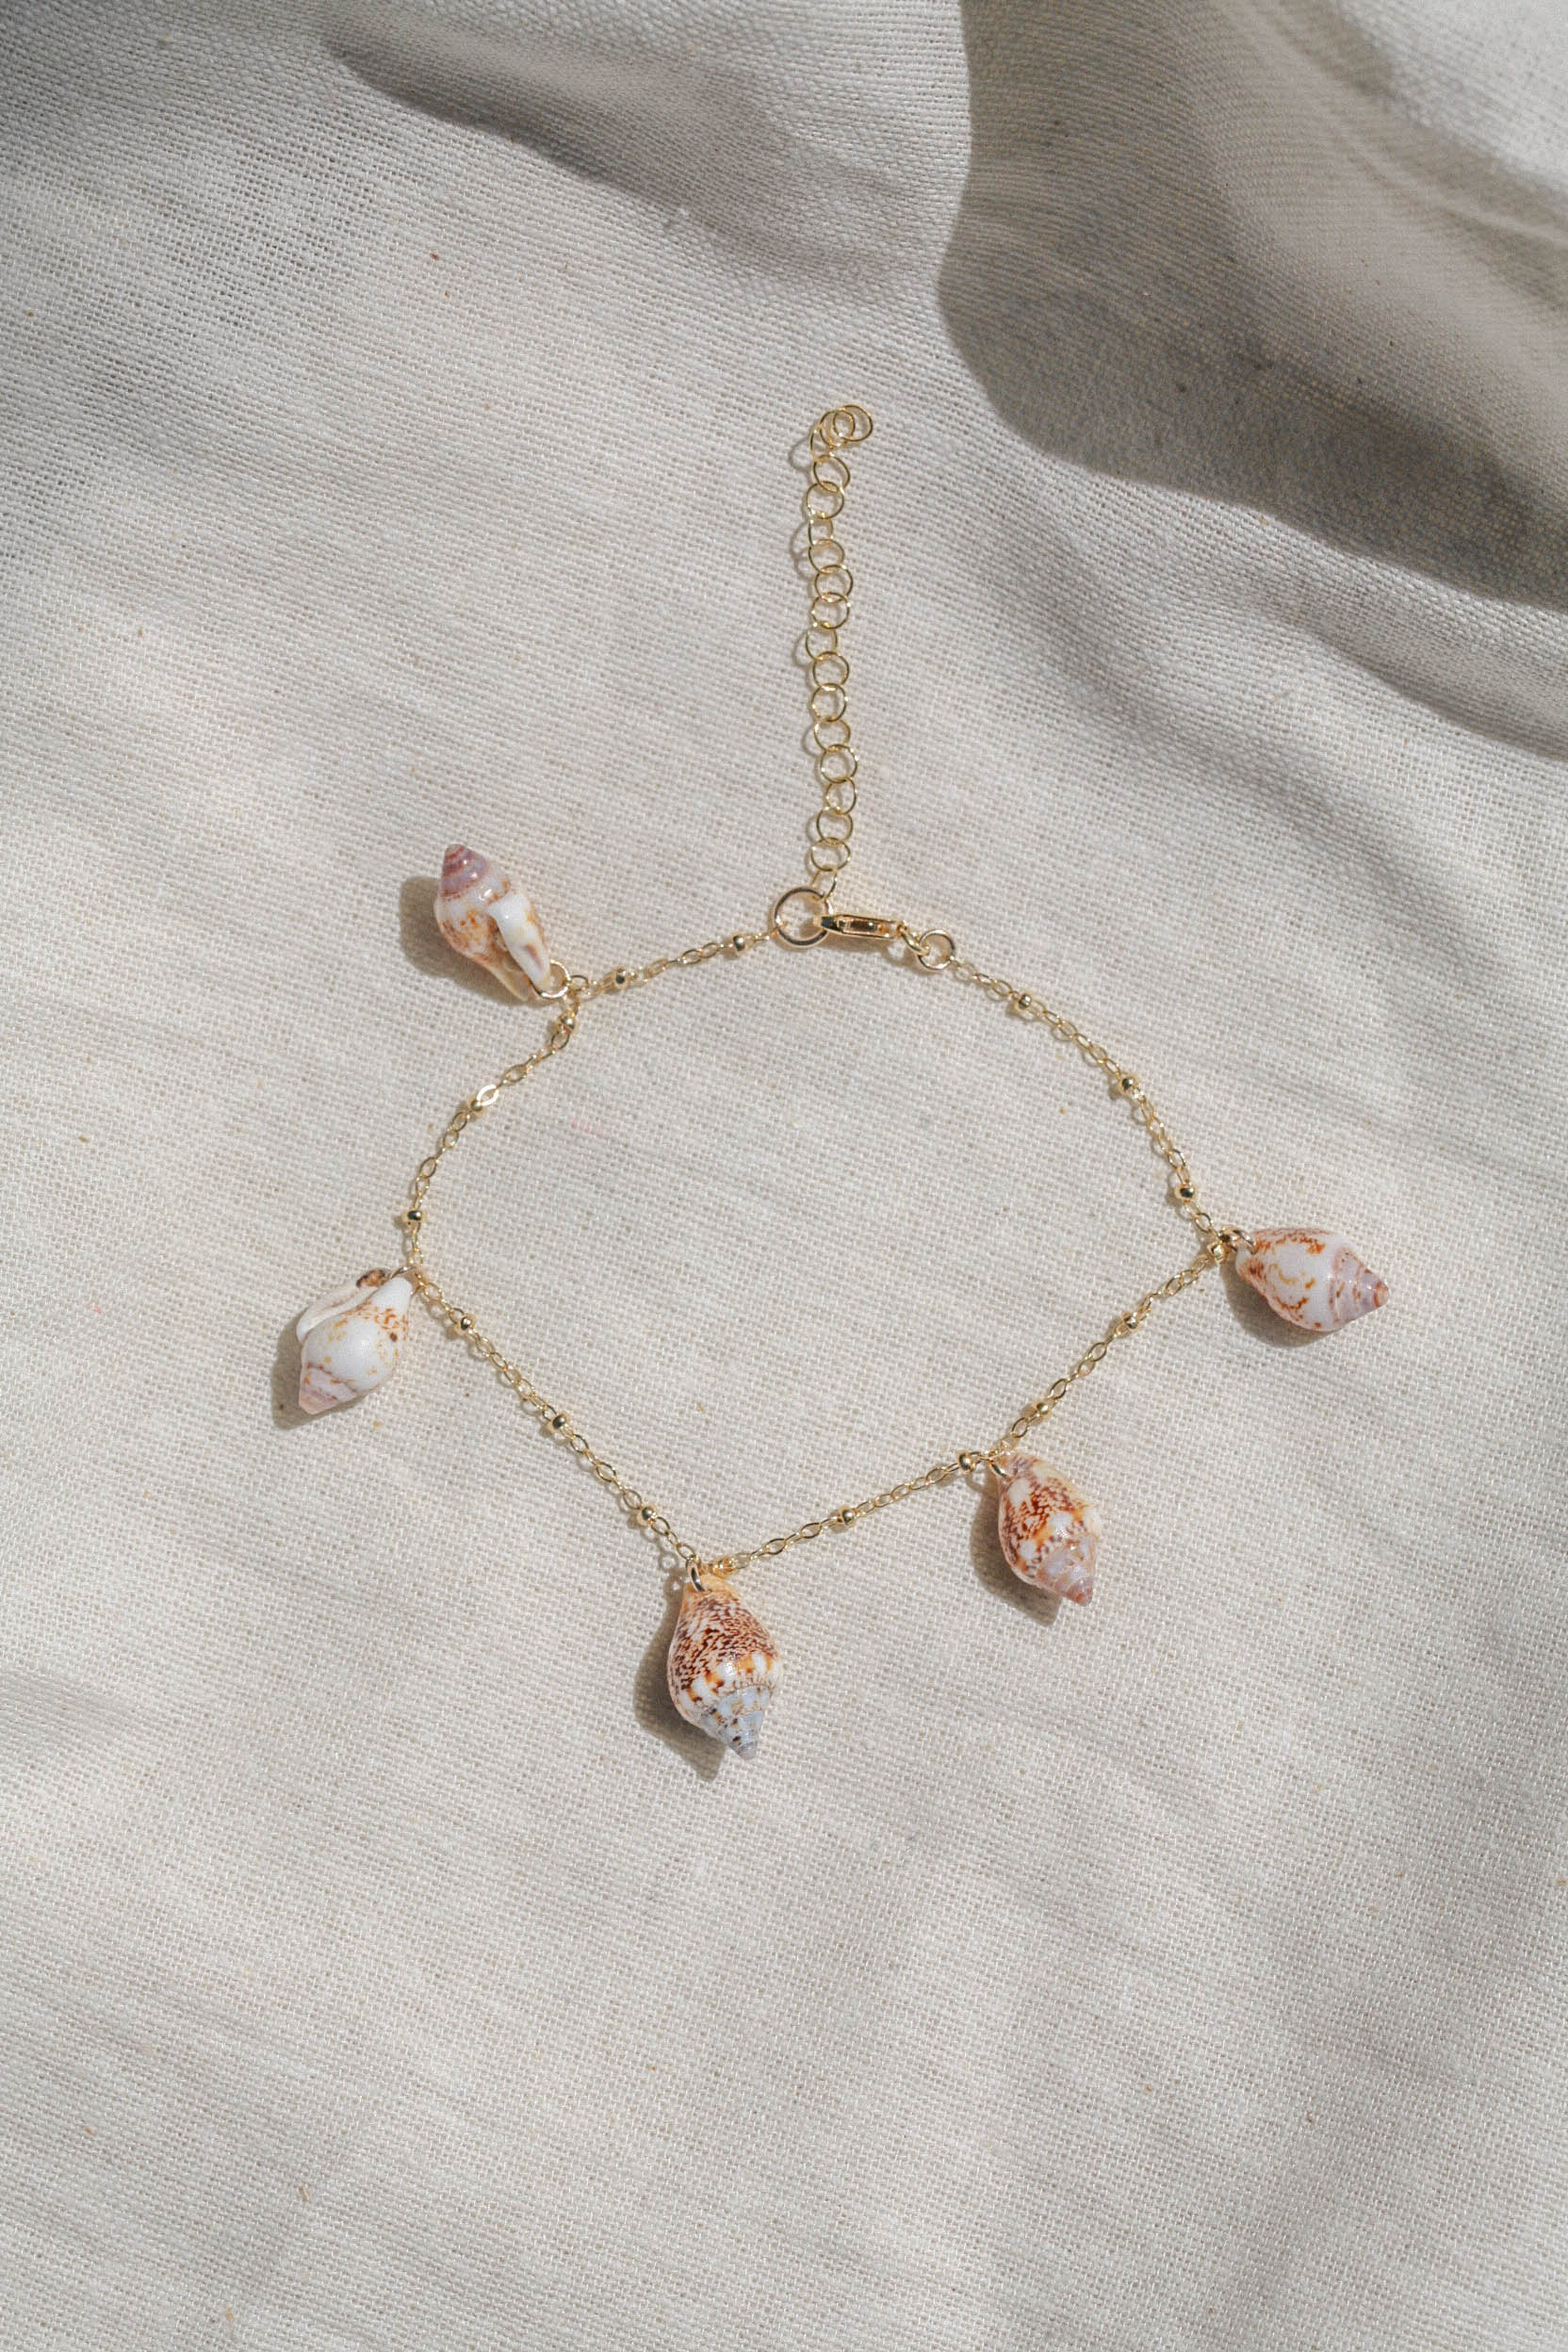 Seashell anklets